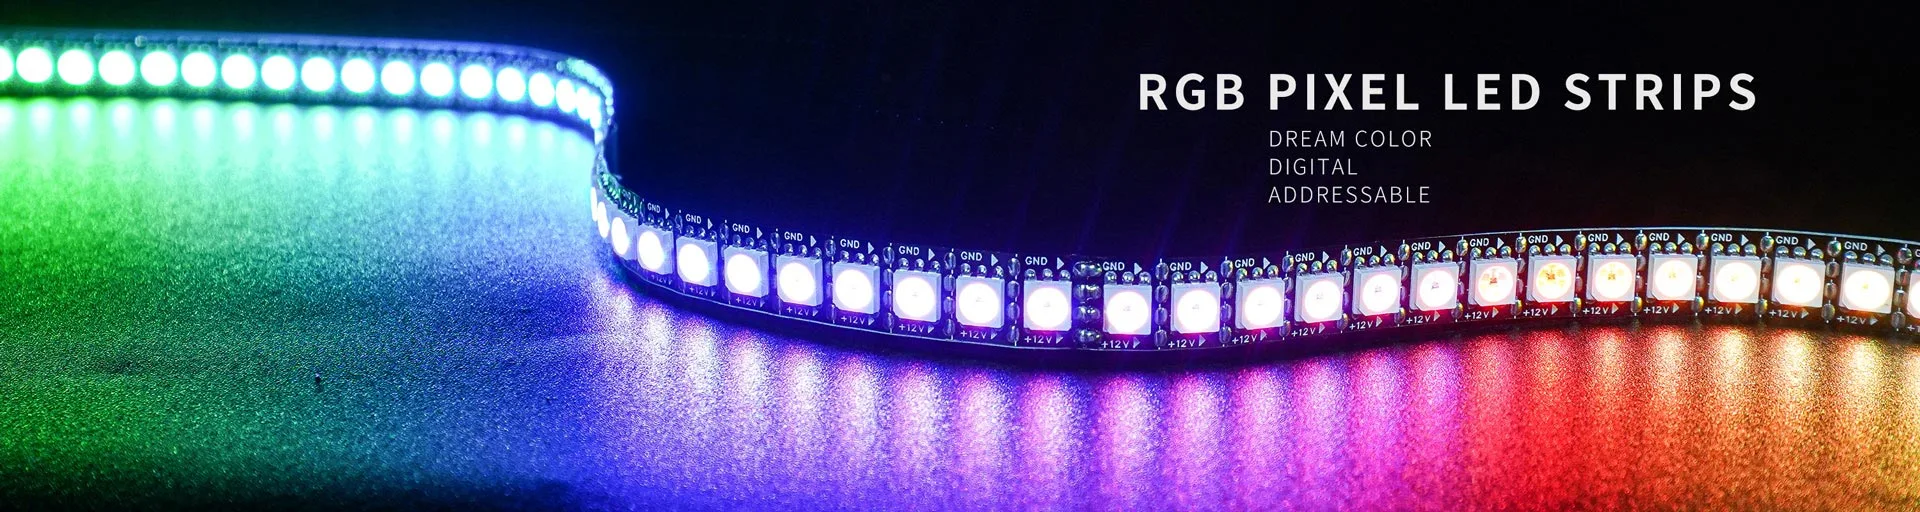 Dream color pixel IC SMD led strips